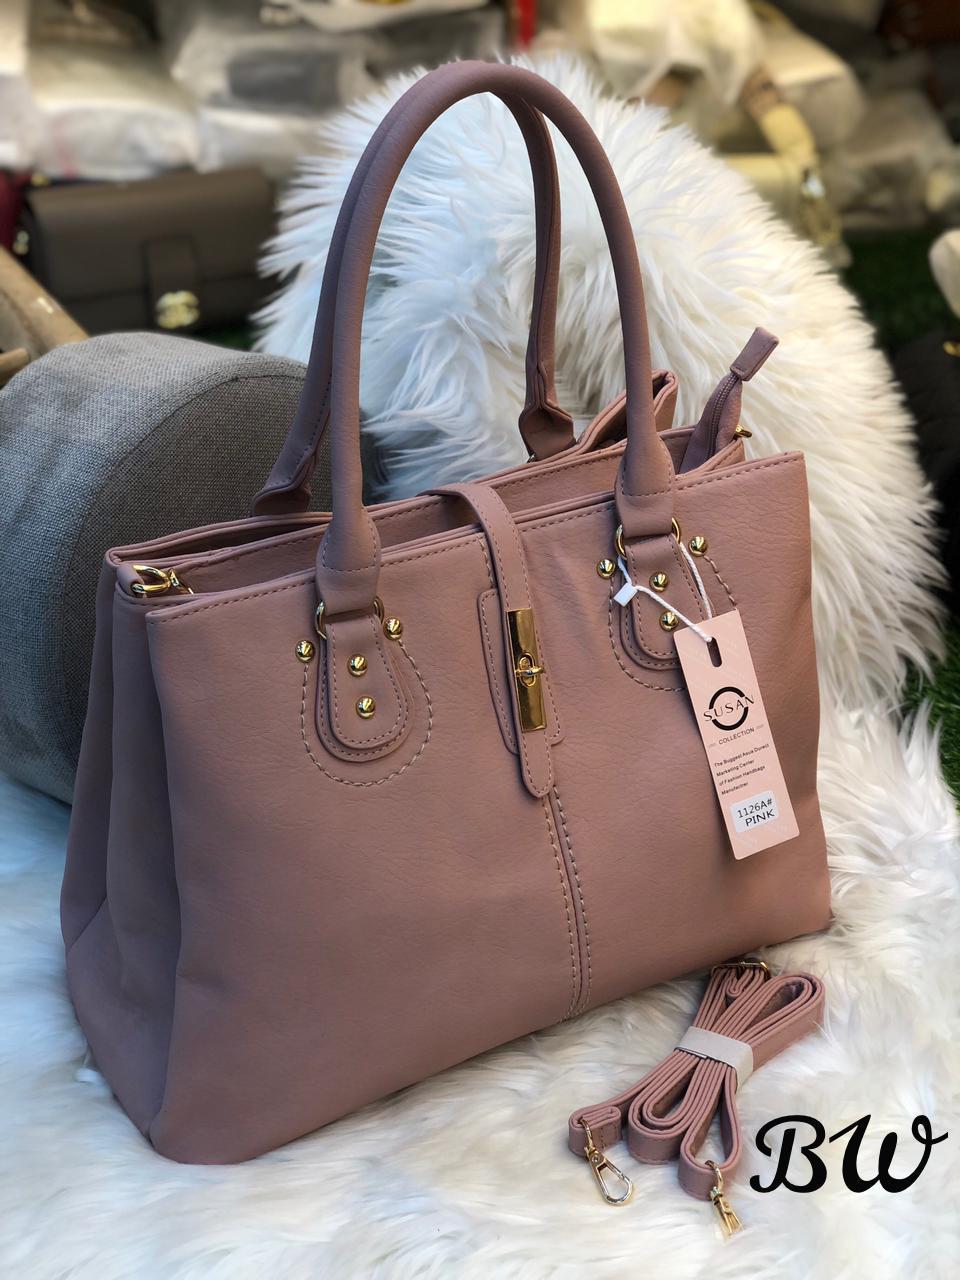 Buy Luxurious & Elegant Retro style Hand bag/Ladies purse.Comes with  beautiful muffler in handle,long shoulder belt inside (BROWN) at Amazon.in